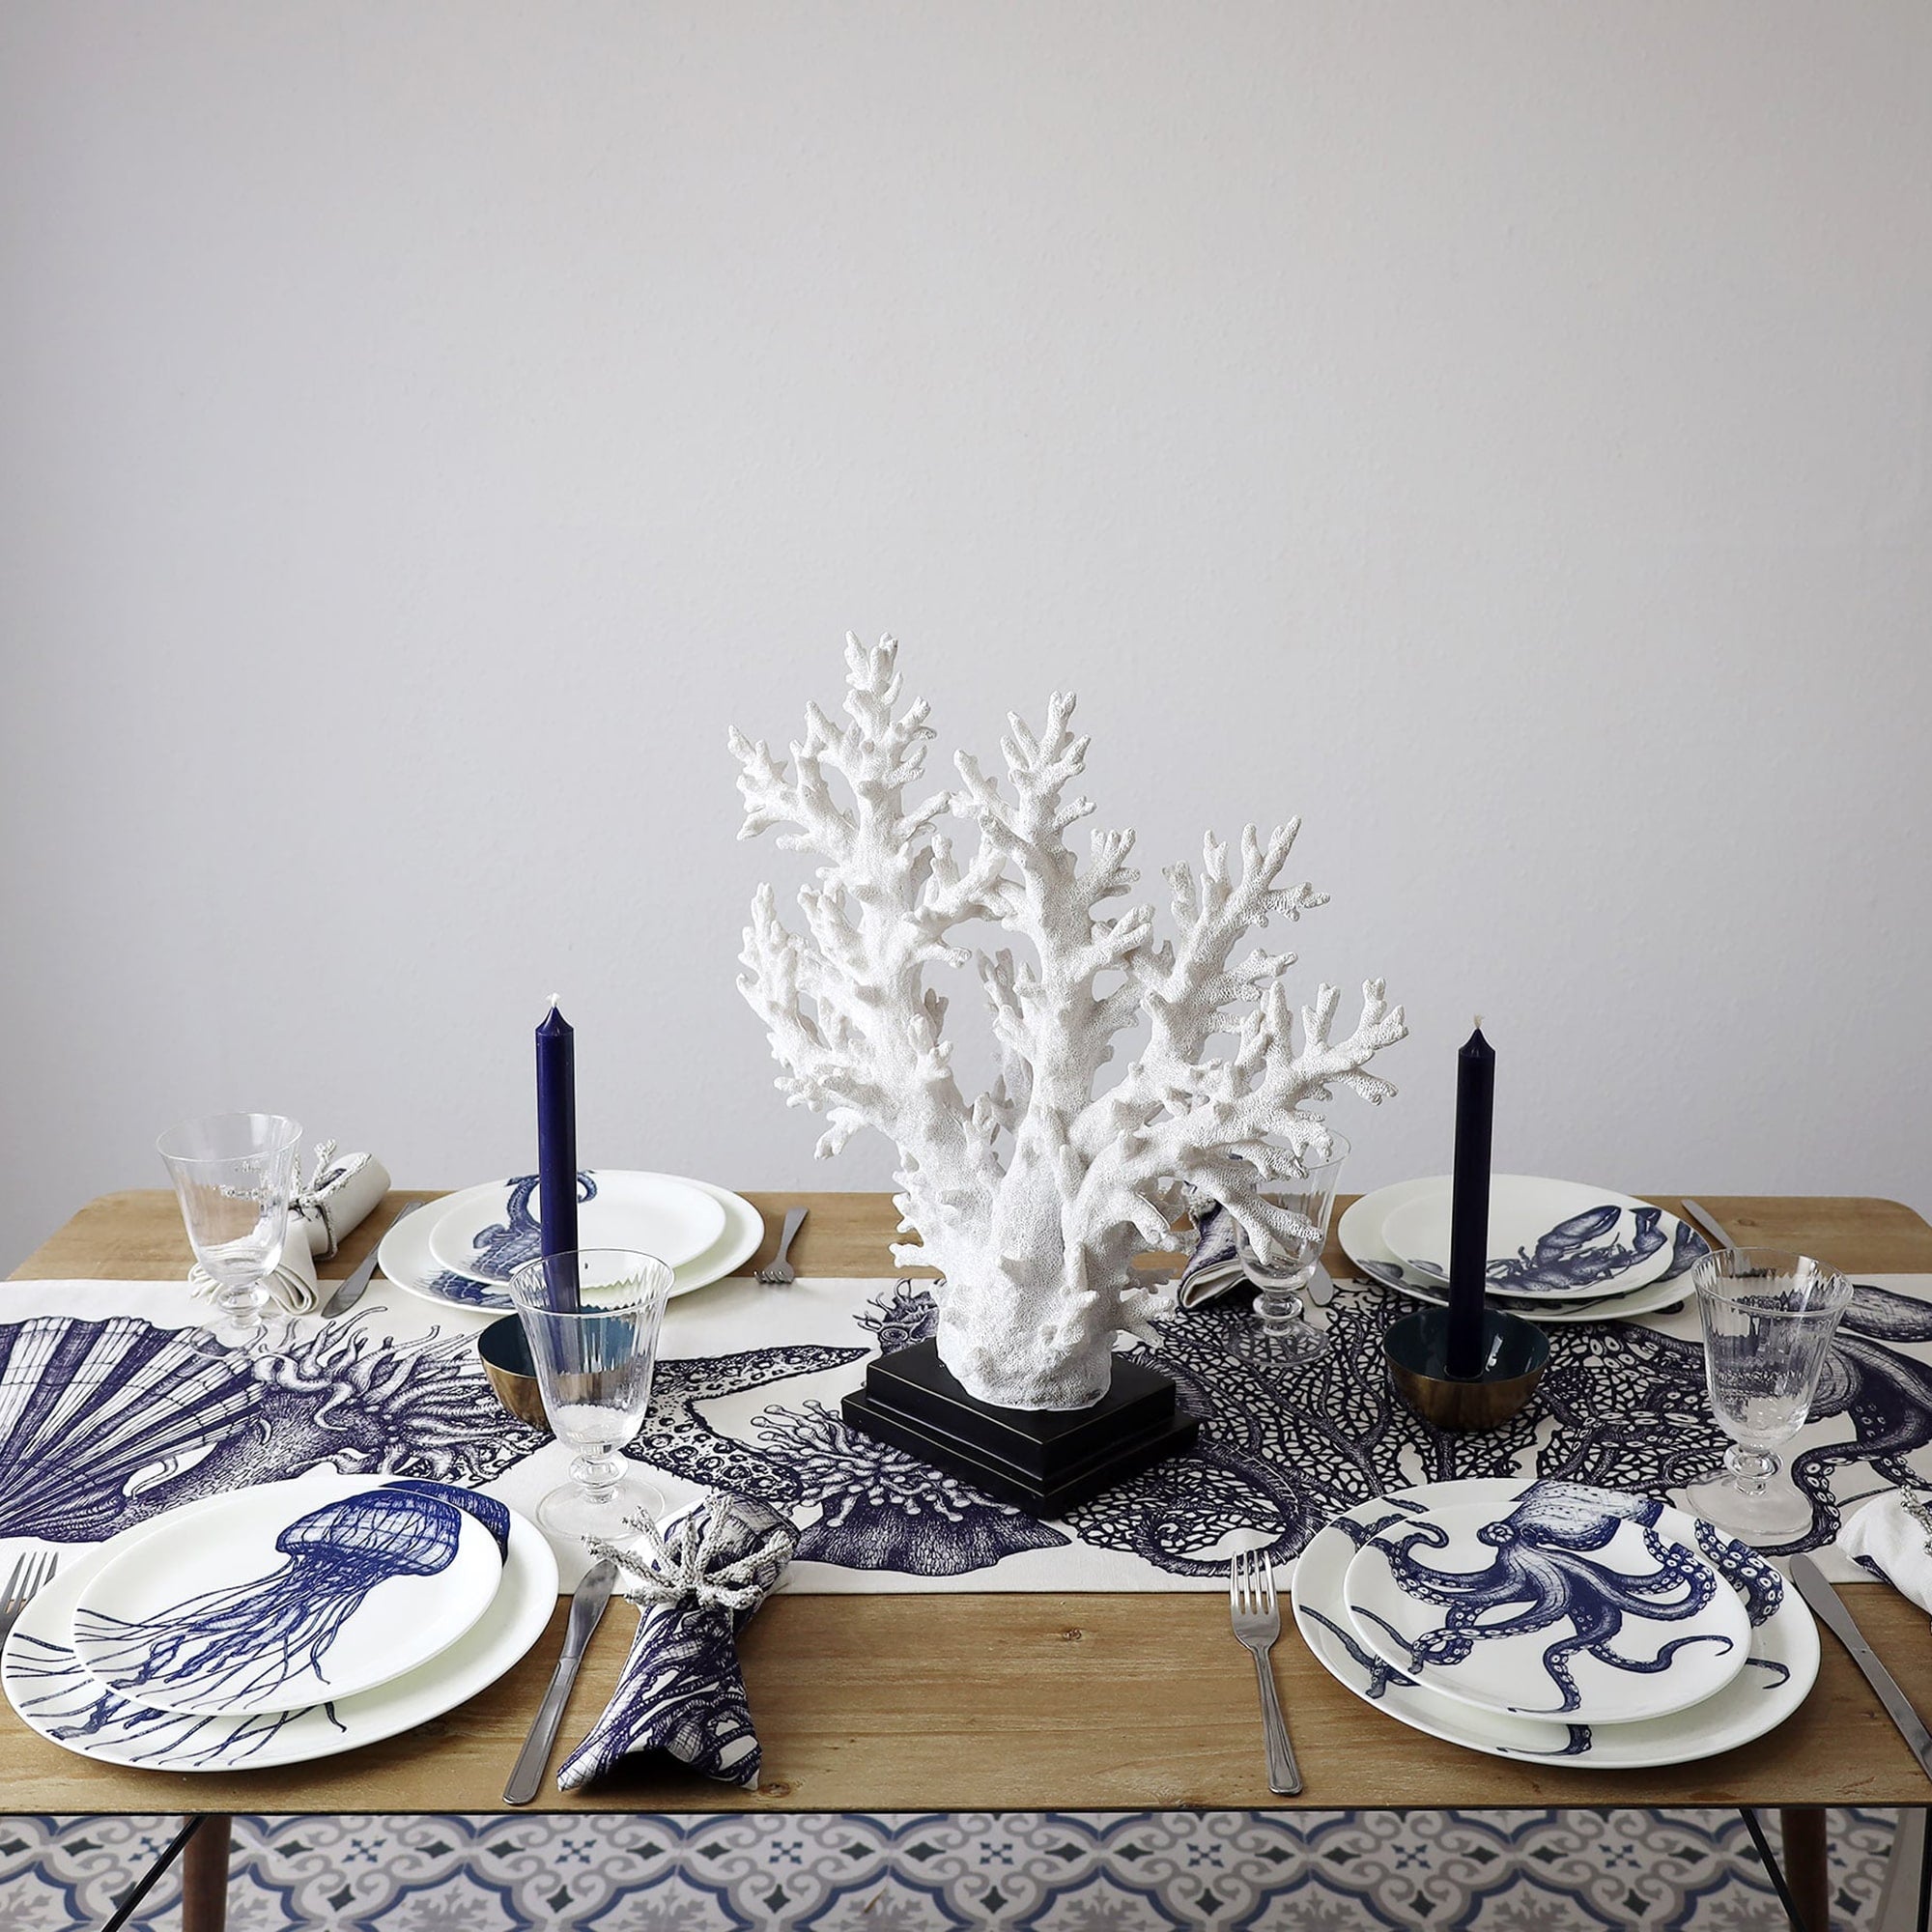 Cotton and Linen mix table runner with hand drawn illustrations of Navy Octopus,Crab,Seahorse and others from our classic sea creatures in Navy on white placed on a table.Also on the table ia a centrepiece of white coral and the table is laid up with our classic china and other tableware